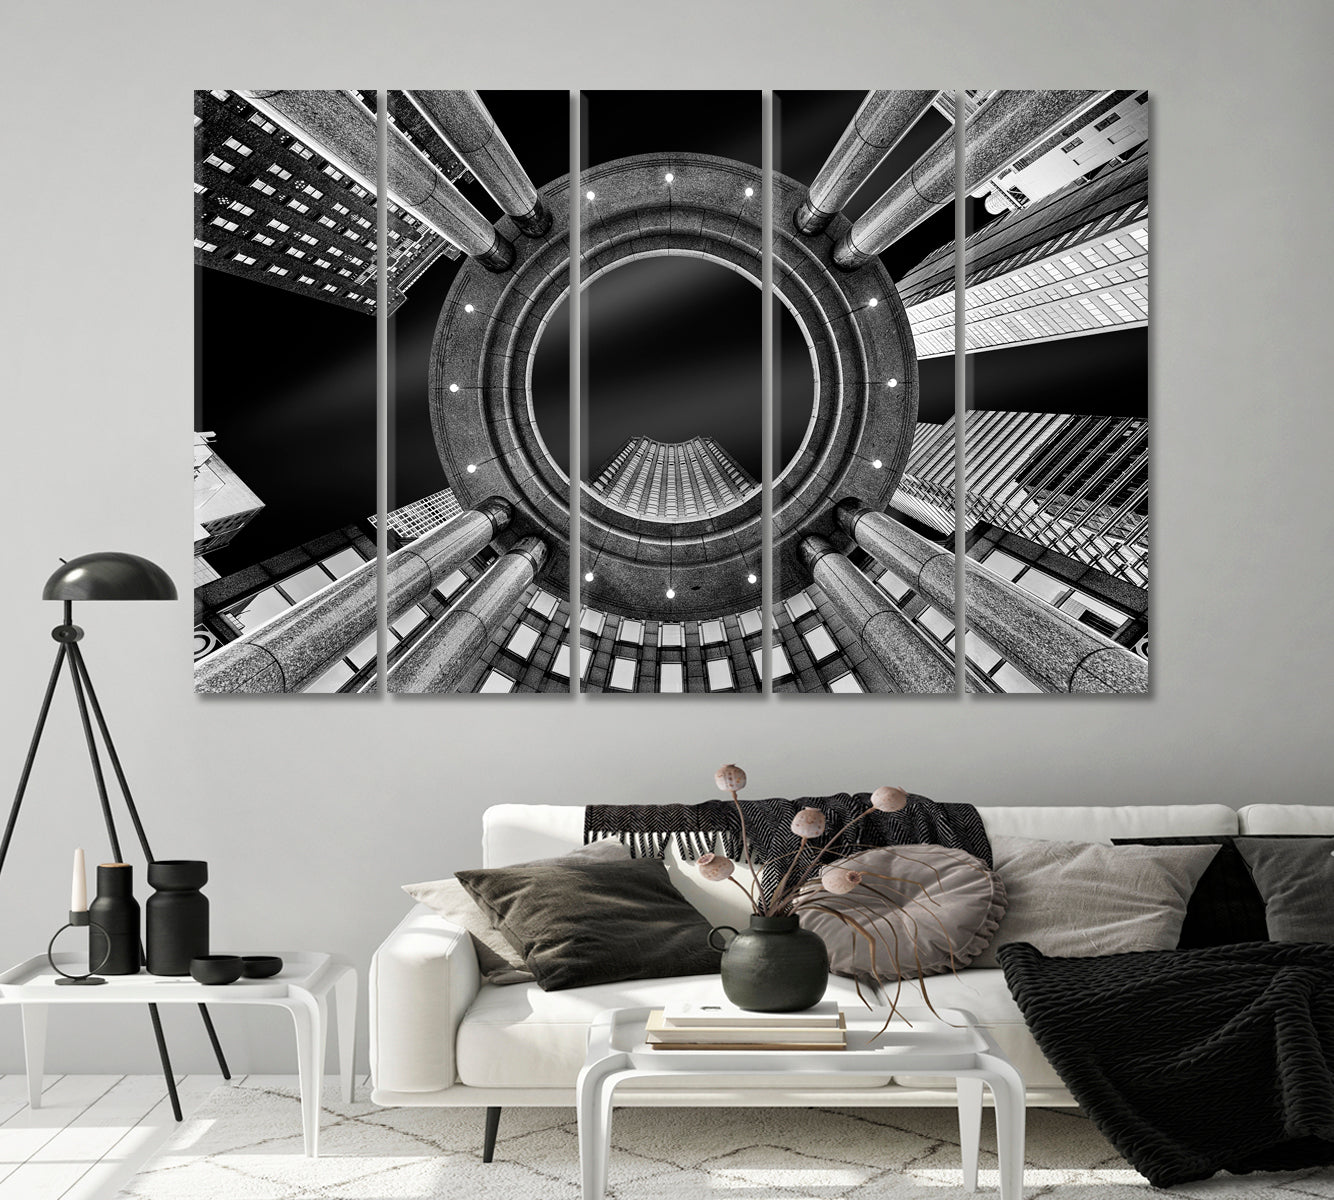 Bottom View of New York City Skyscrapers in Black White Canvas Print-Canvas Print-CetArt-1 Panel-24x16 inches-CetArt